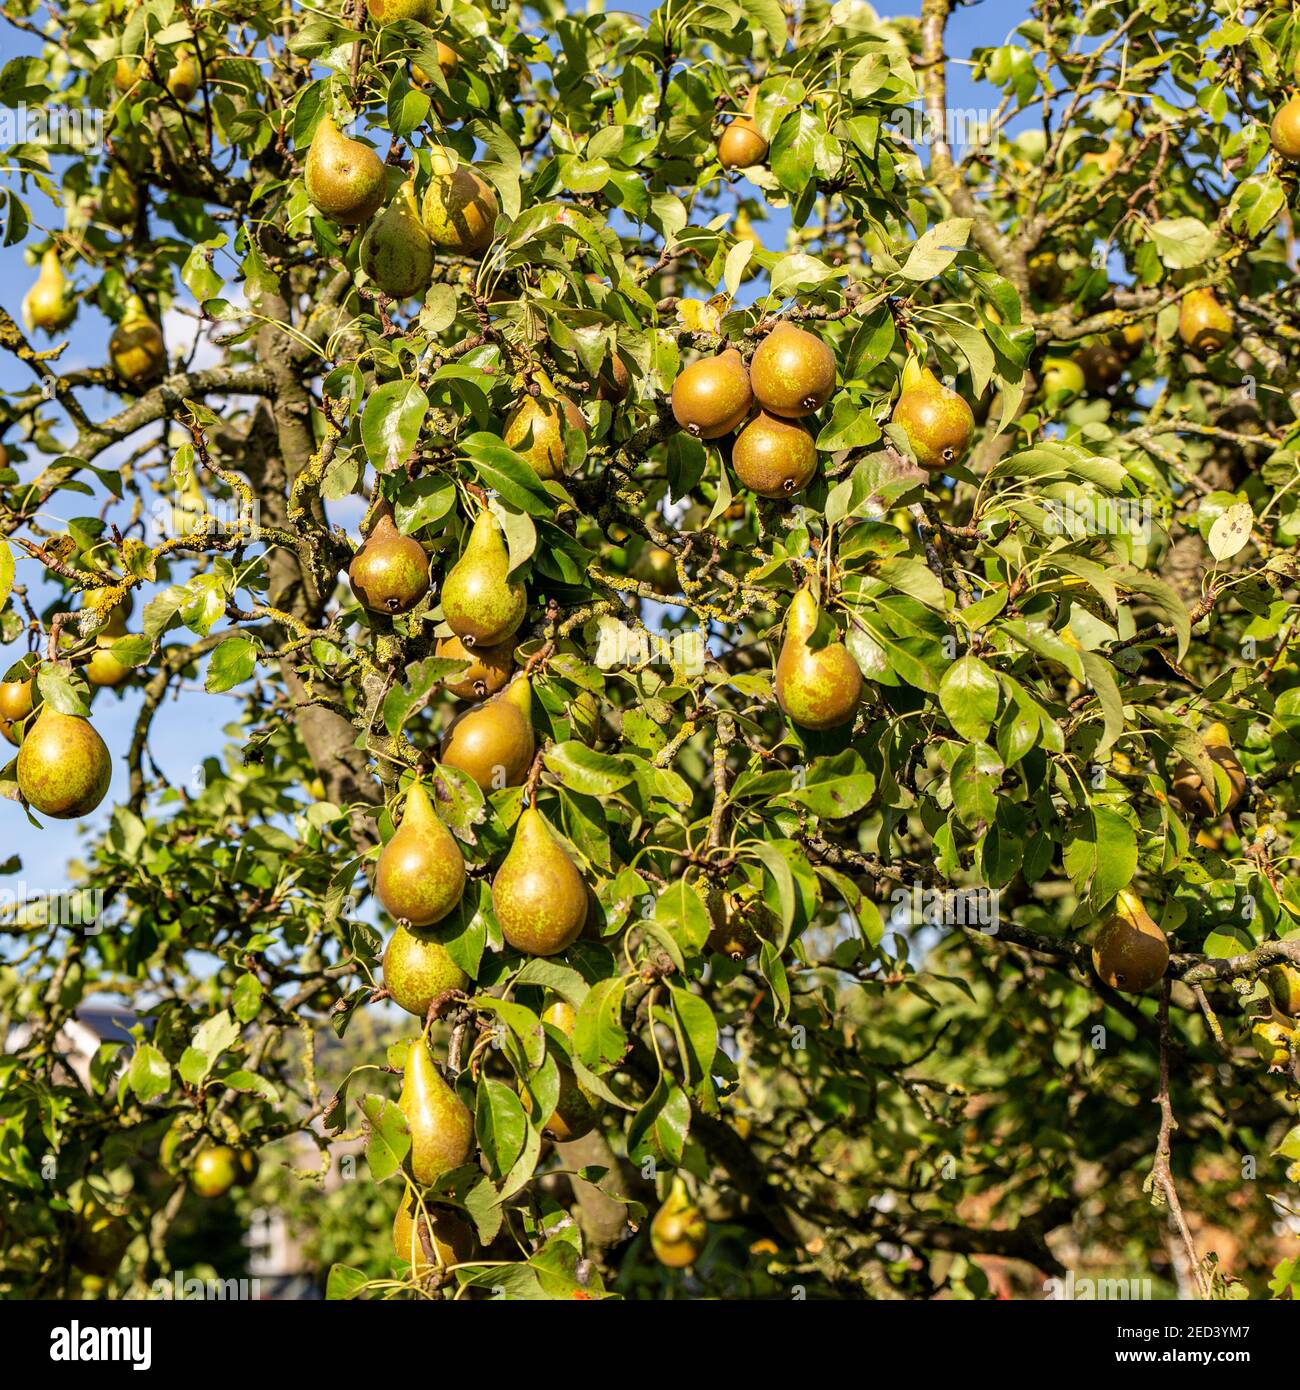 A crop of Conference Pears ready for harvest hanging from the branches of the tree.  Yorkshire, England, UK Stock Photo